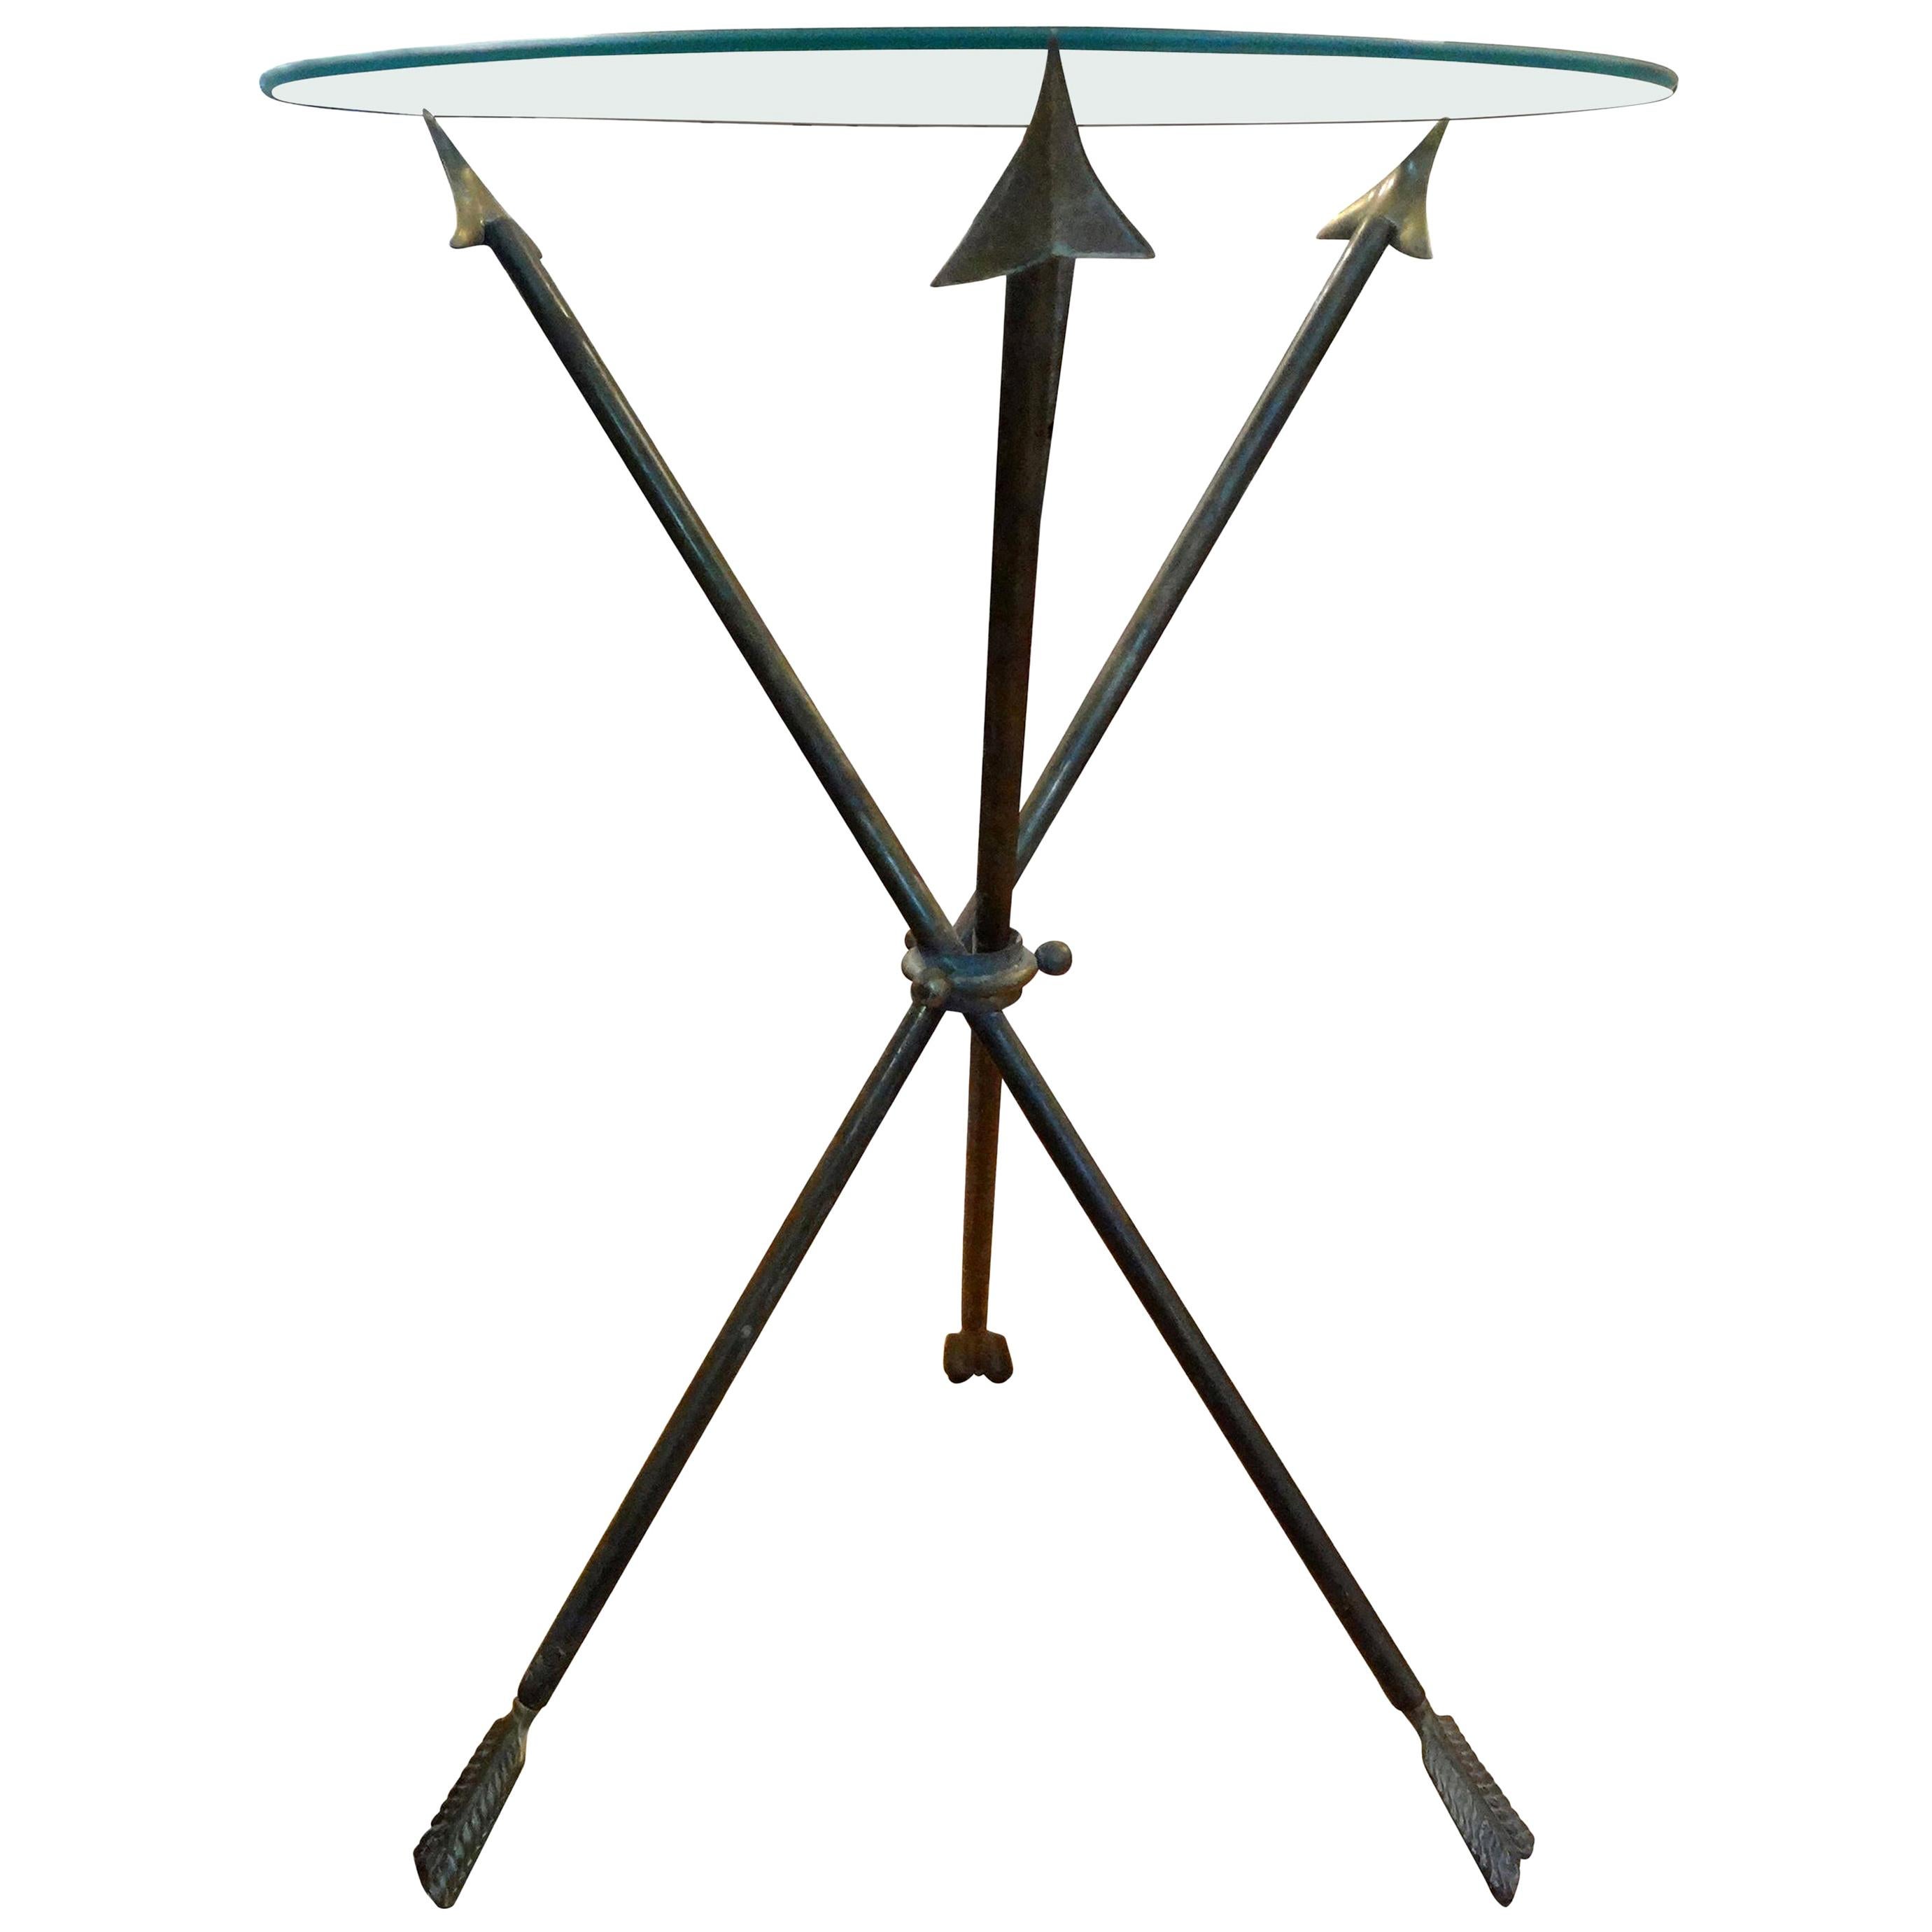 Chic Italian Mid-Century Modern Gio Ponti inspired brass/bronze tripod table or guéridon. This vintage Italian neoclassical style or Directoire style table, side table, drink table or cigarette table has an arrow design and a glass top.